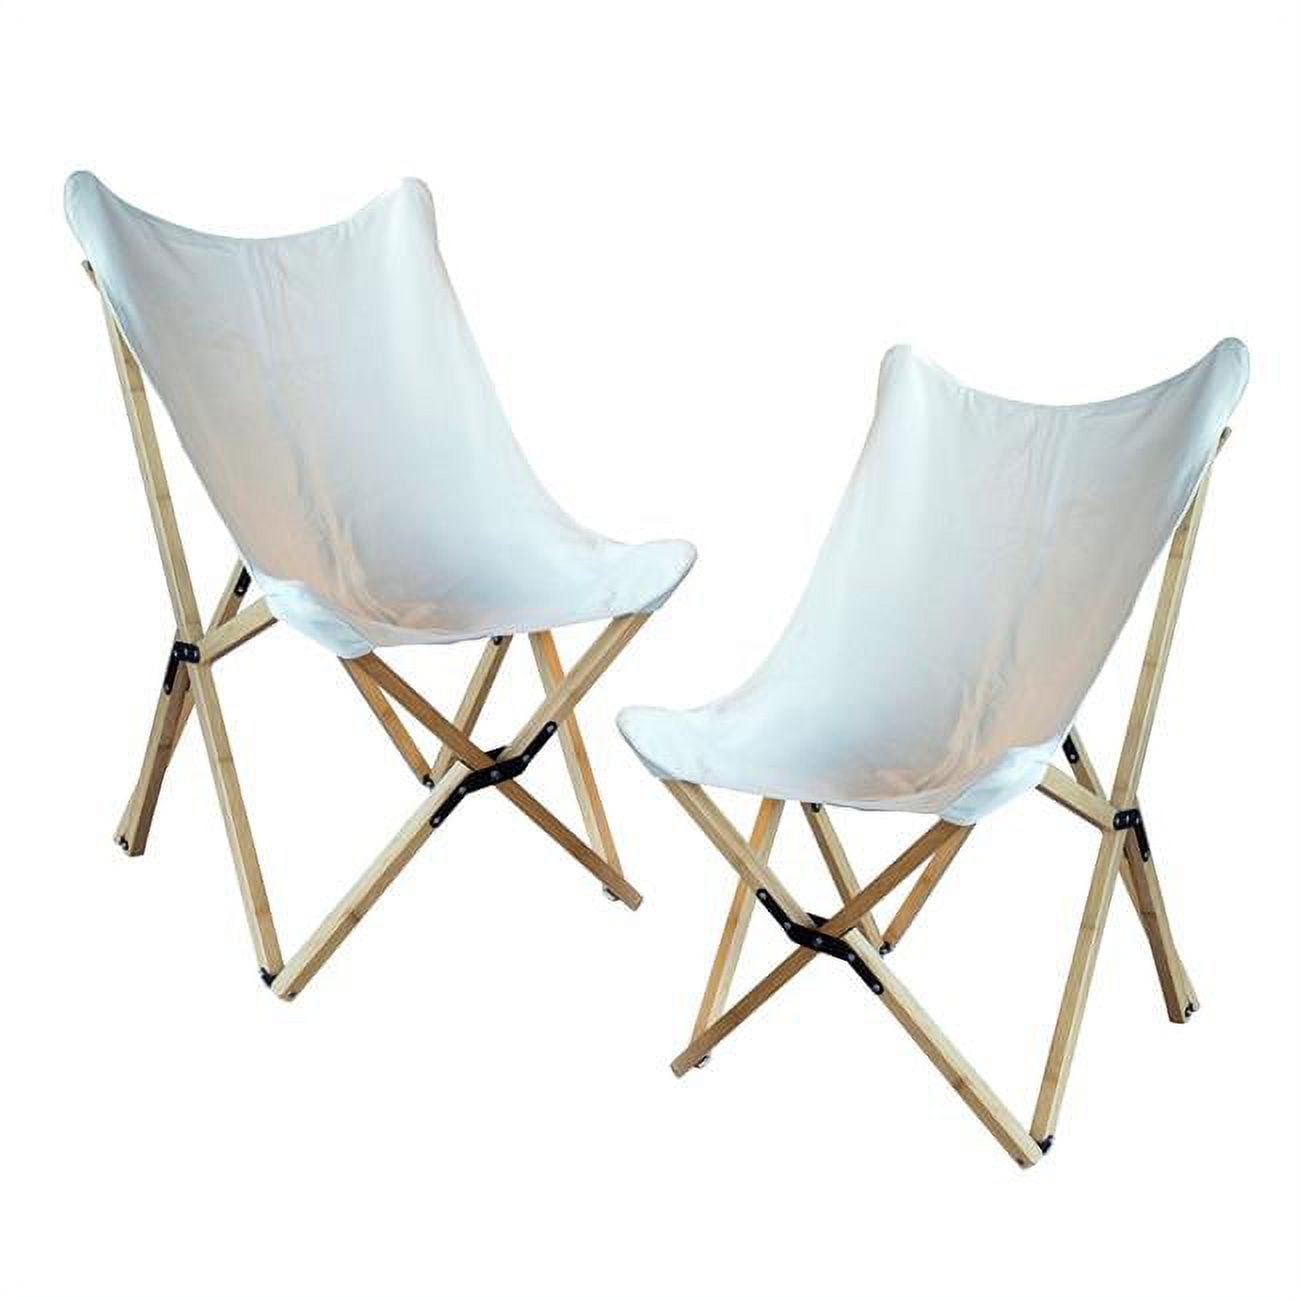 Bfcbcw2pk Canvas & Bamboo Butterfly Chair - White - 2 Piece Set